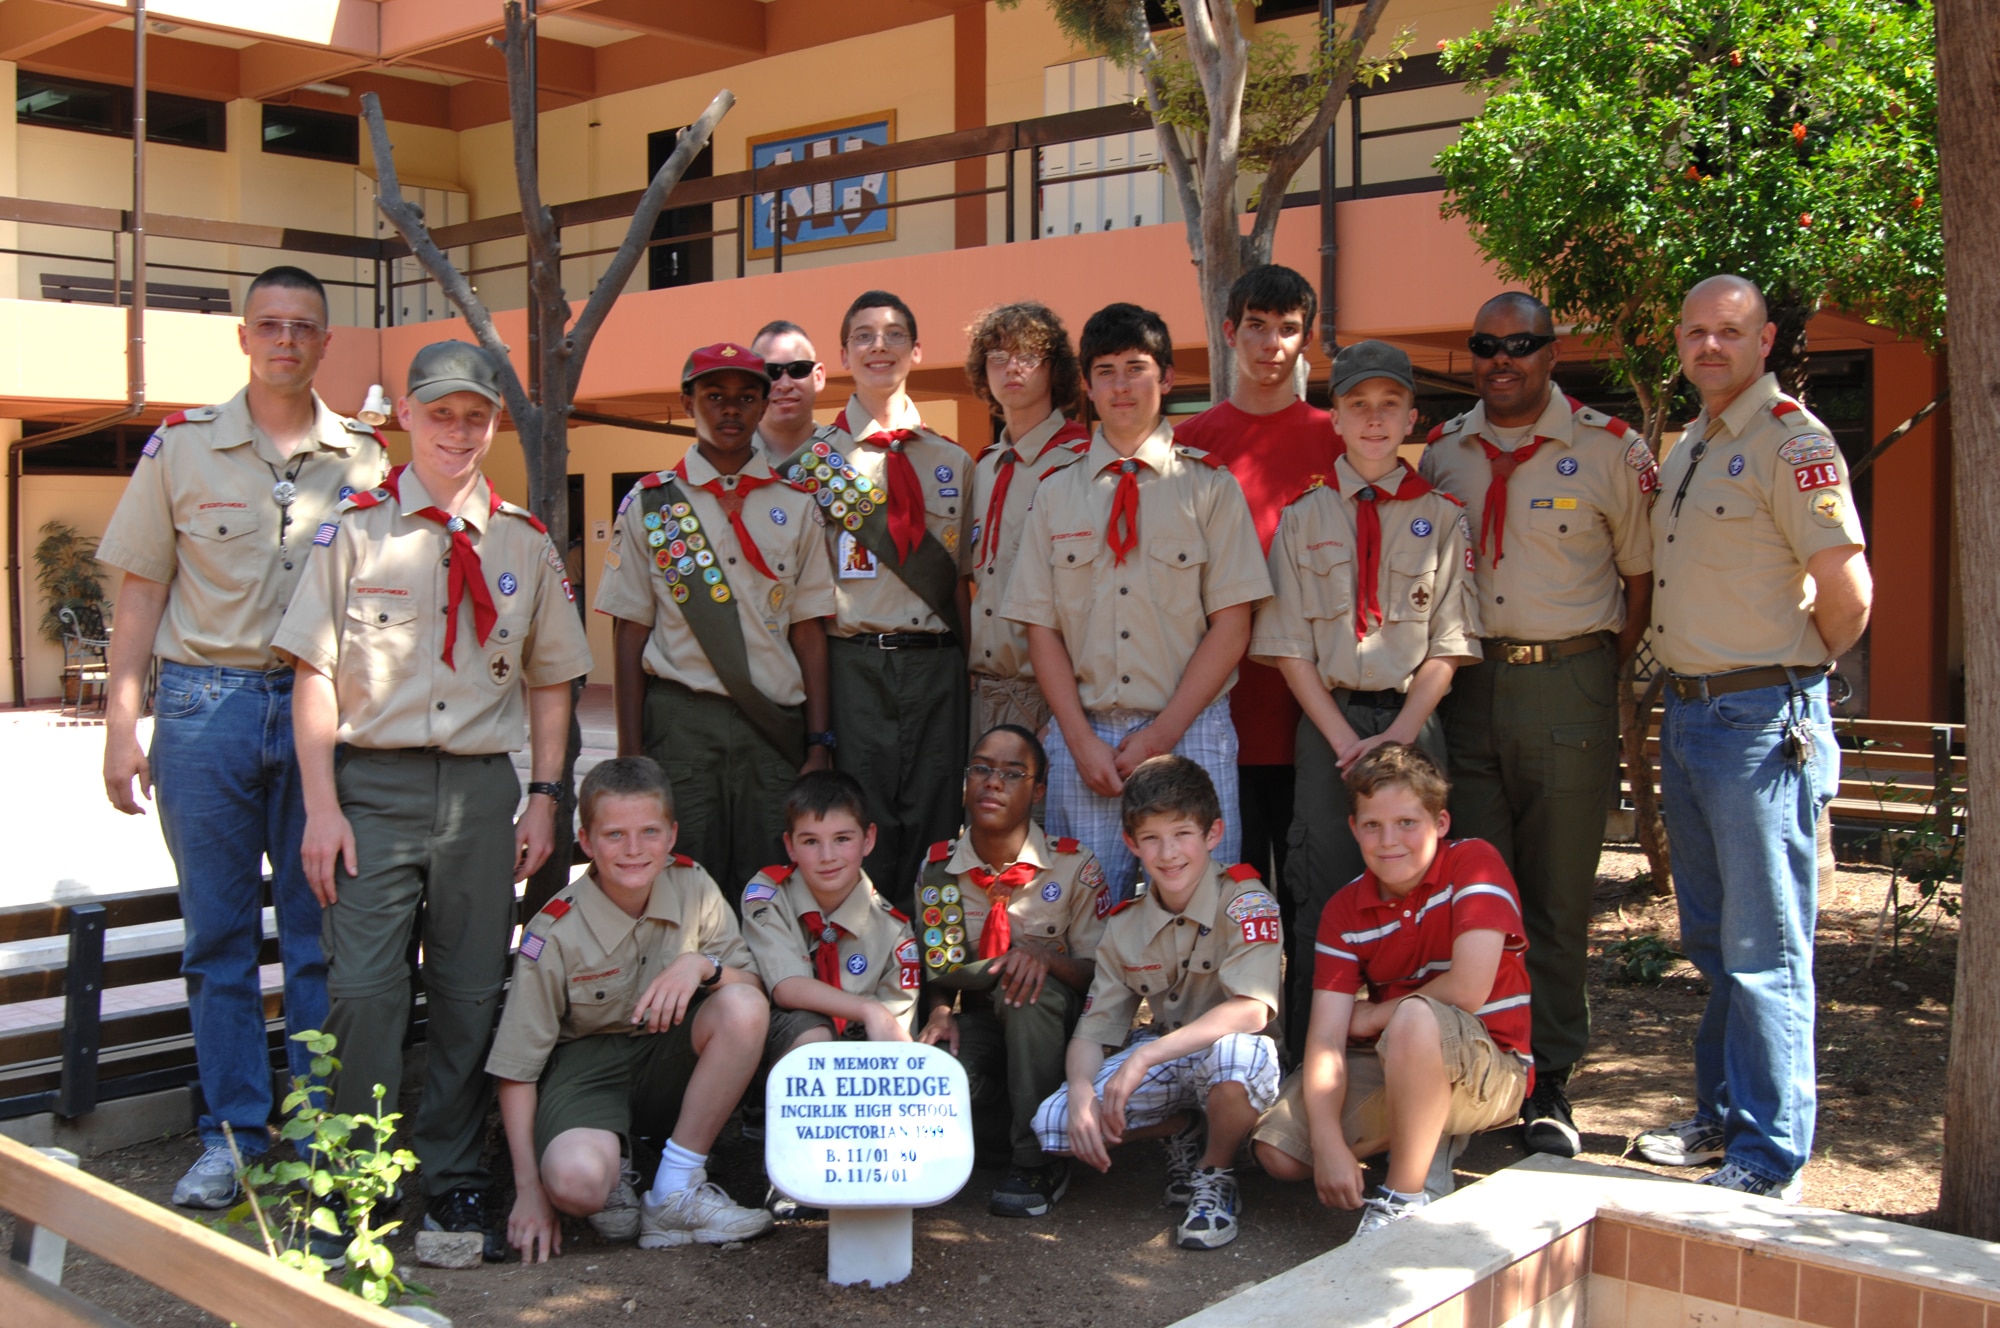 Members of Boy Scout troop 218 pose by the Ira Eldridge memorial marker Wednesday, June 3, 2009 after the Ira Eldridge Memorial Re-dedication Ceremony at Incirlik Unit School, Incirlik Air Base, Turkey. The troop honored the memory of Eagle Scout Eldridge who died in 2001 of leukemia. Ira Eldridge was also the class of 1999 valedictorian at Incirlik Unit School, vice president of the Incirlik Unit School National Honor Society and a member of the varsity soccer team. A memorial plaque was placed on school grounds, but fell into disrepair over the years. The scouts decided it needed to be resurrected and placed in a more prominent location so current and future generations would not forget him. (U.S. Air Force photo/ Staff Sgt. Lauren Padden)